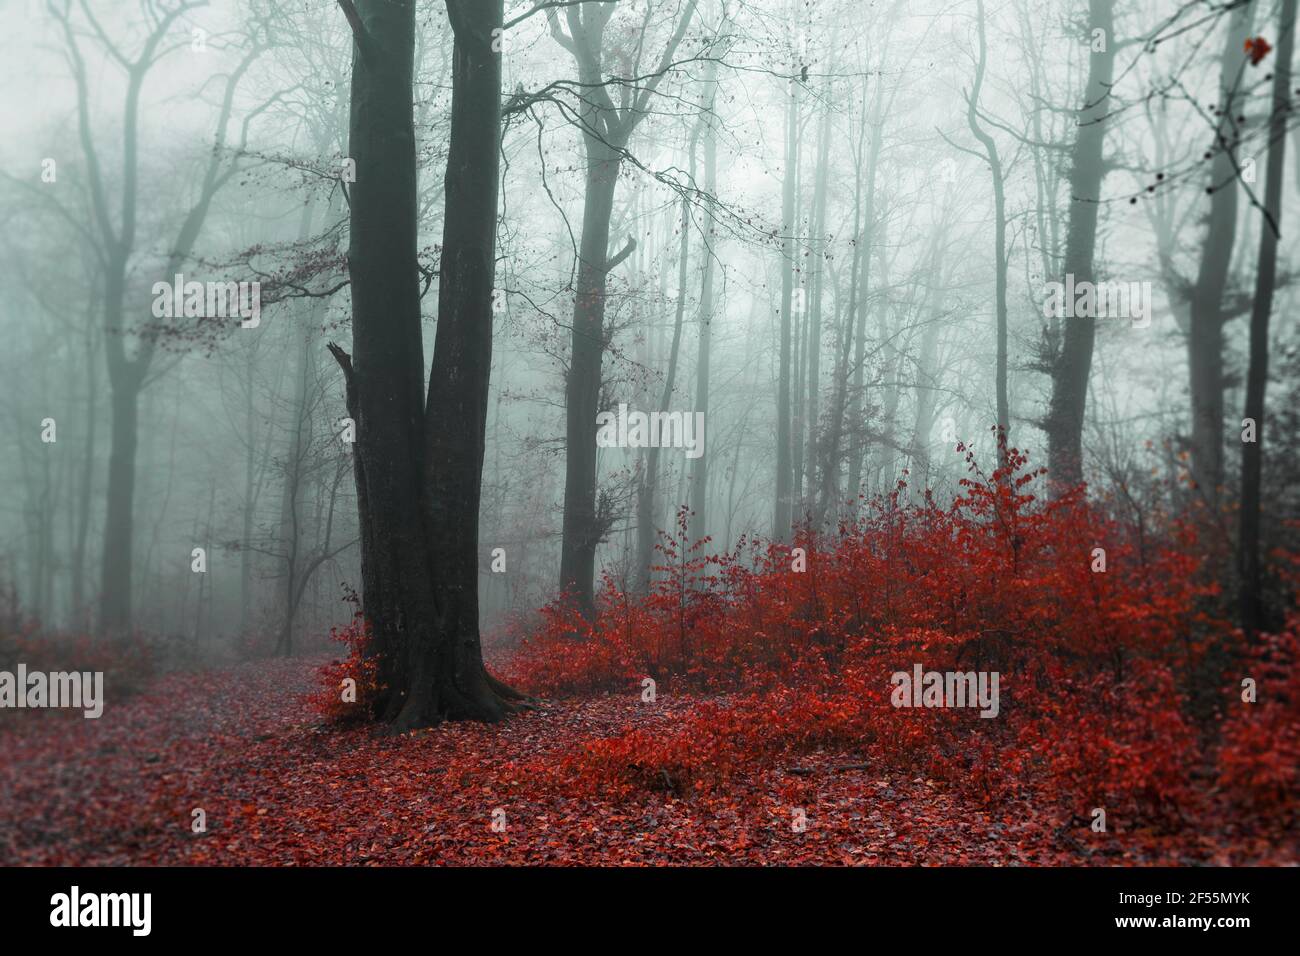 Germania, Wuppertal, Foggy foresta in autunno Foto Stock